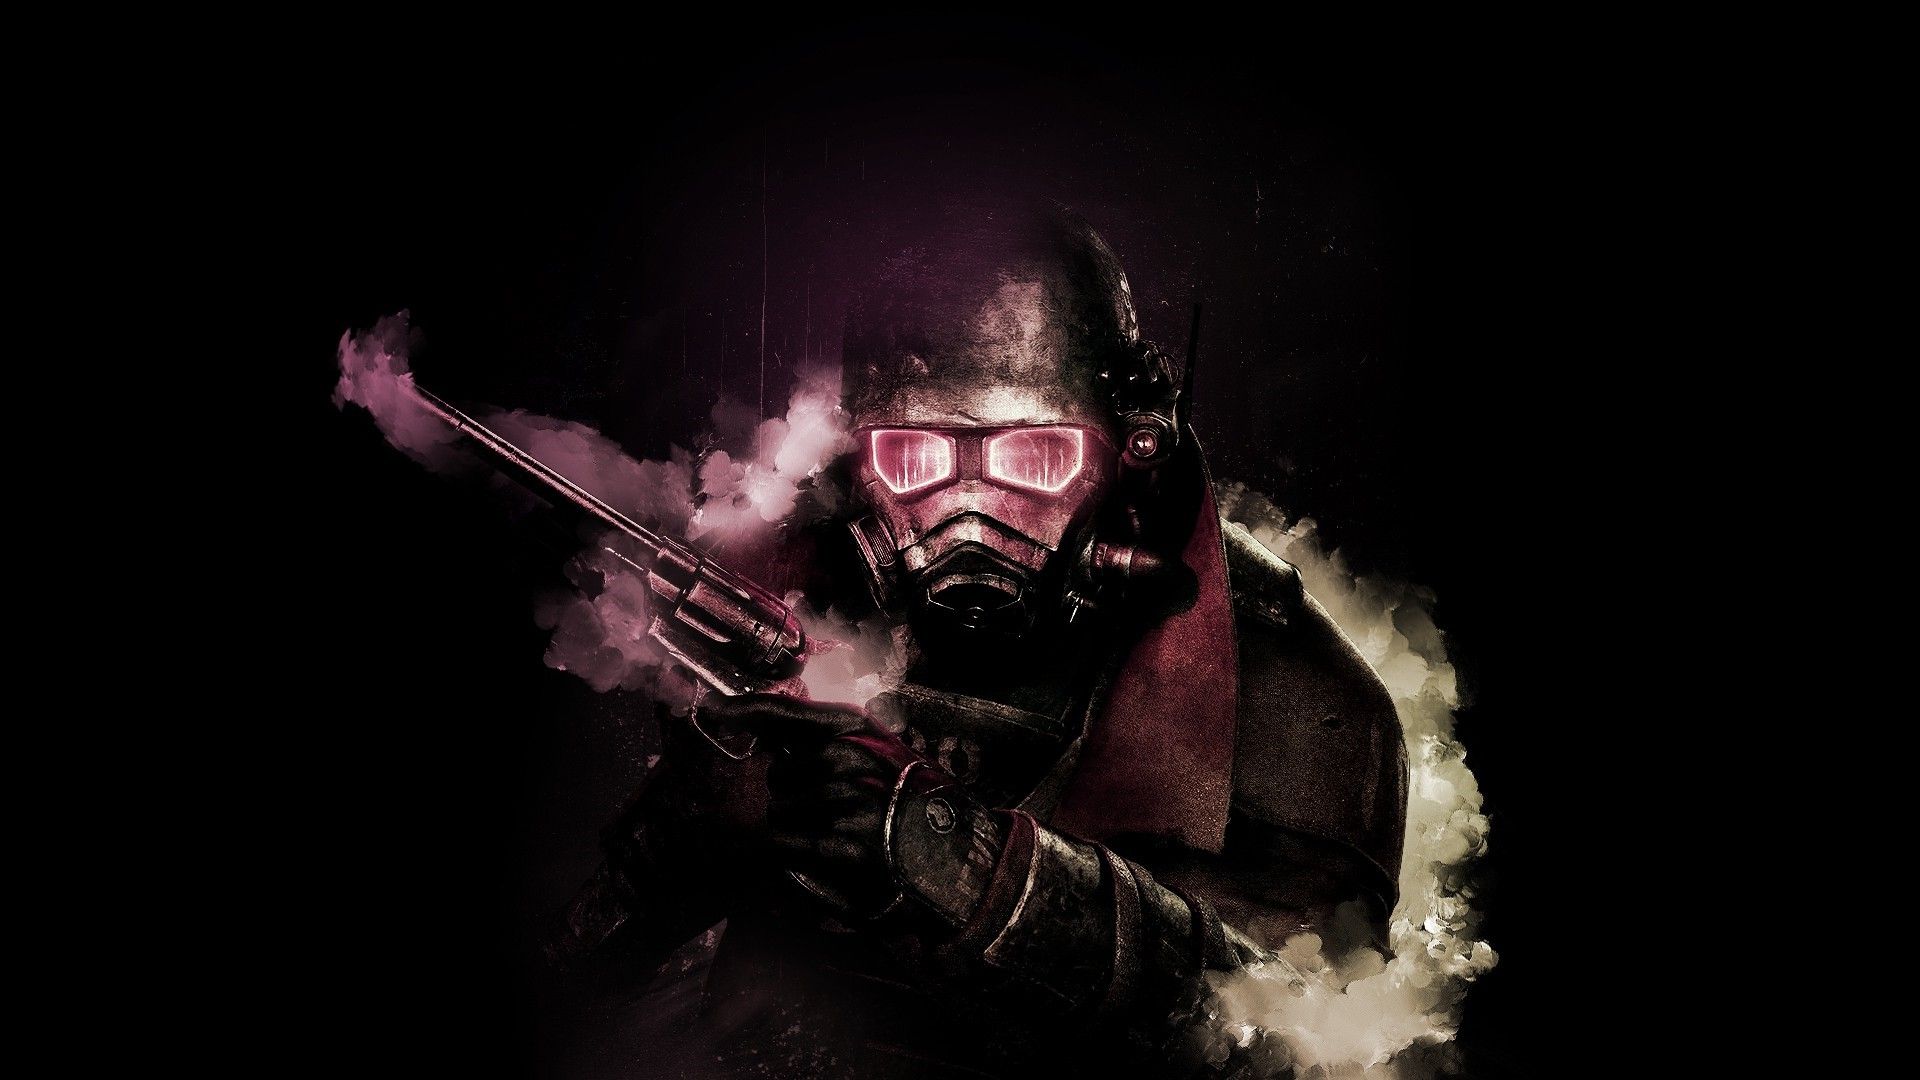 NCR Wallpaper (x-post from r/wallpaper) : r/Fallout